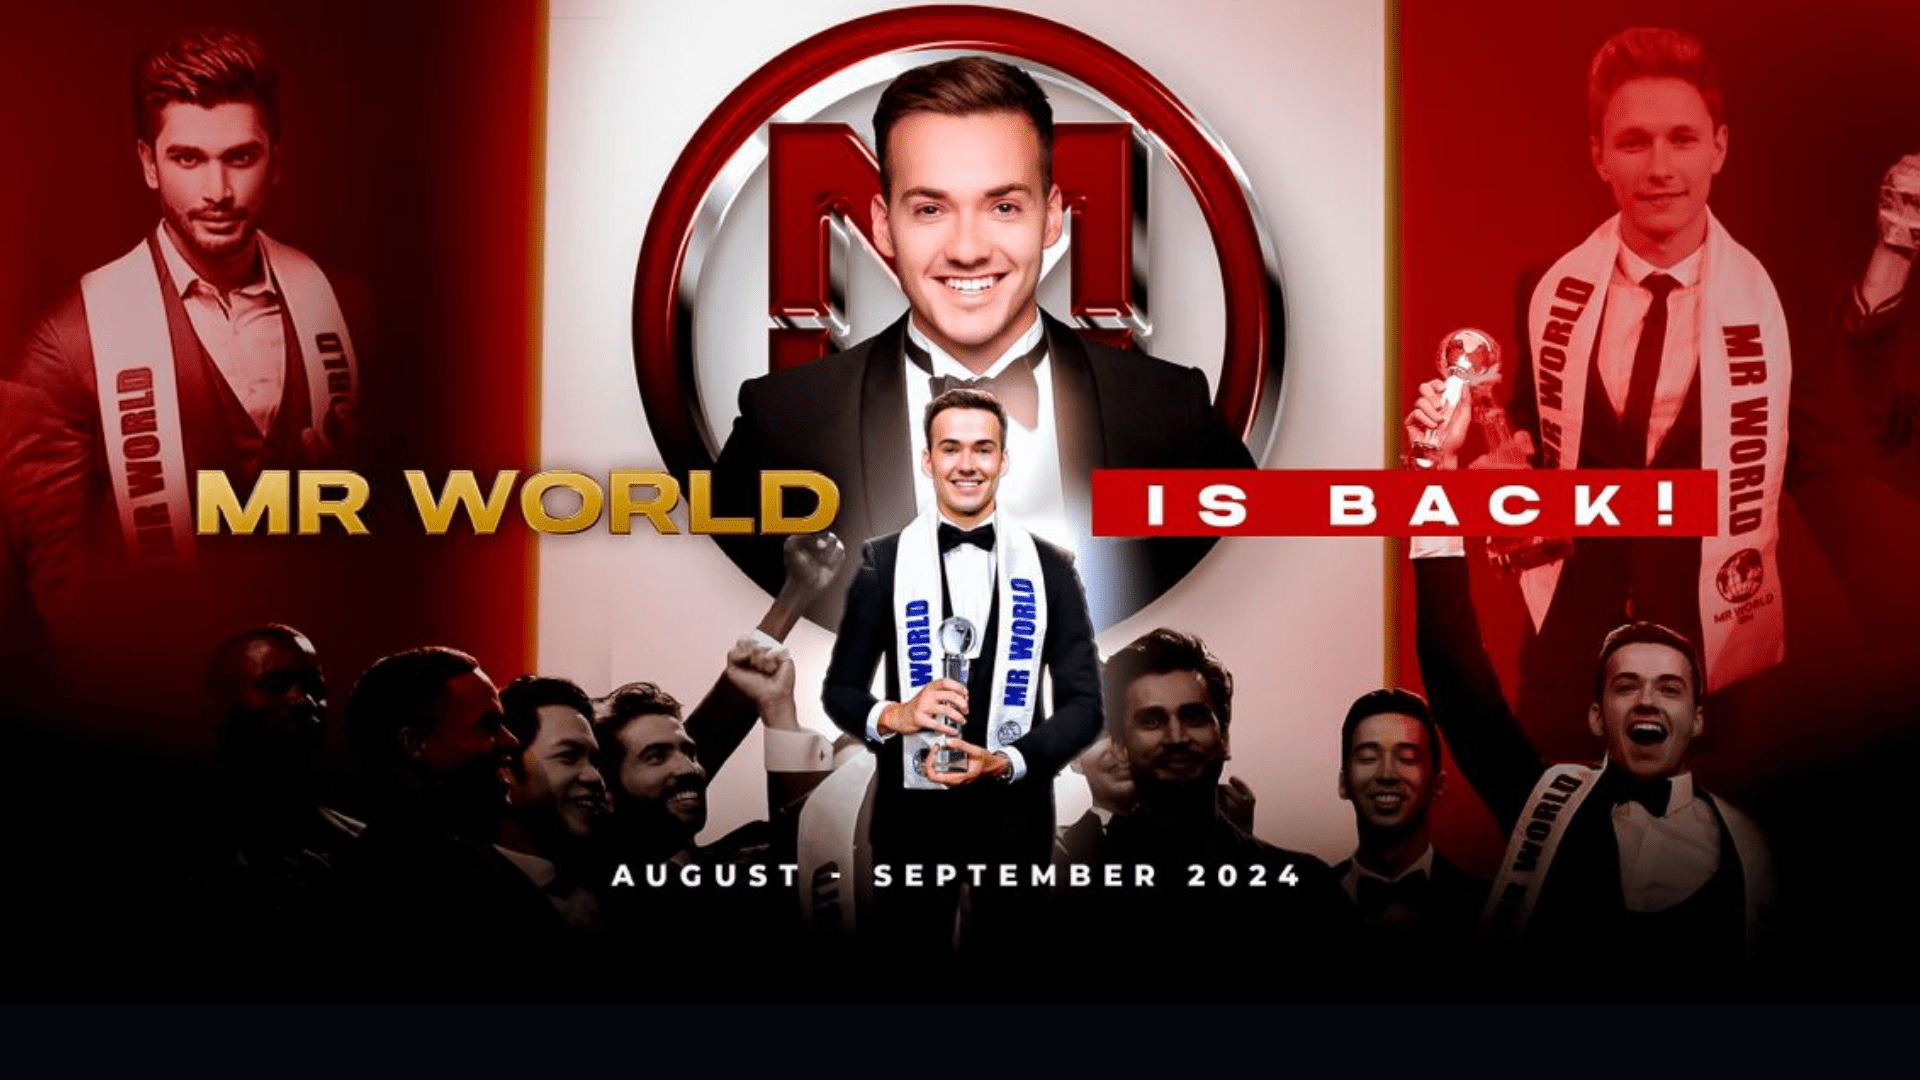 Mister World Returns: Bigger, Better, and More Exciting